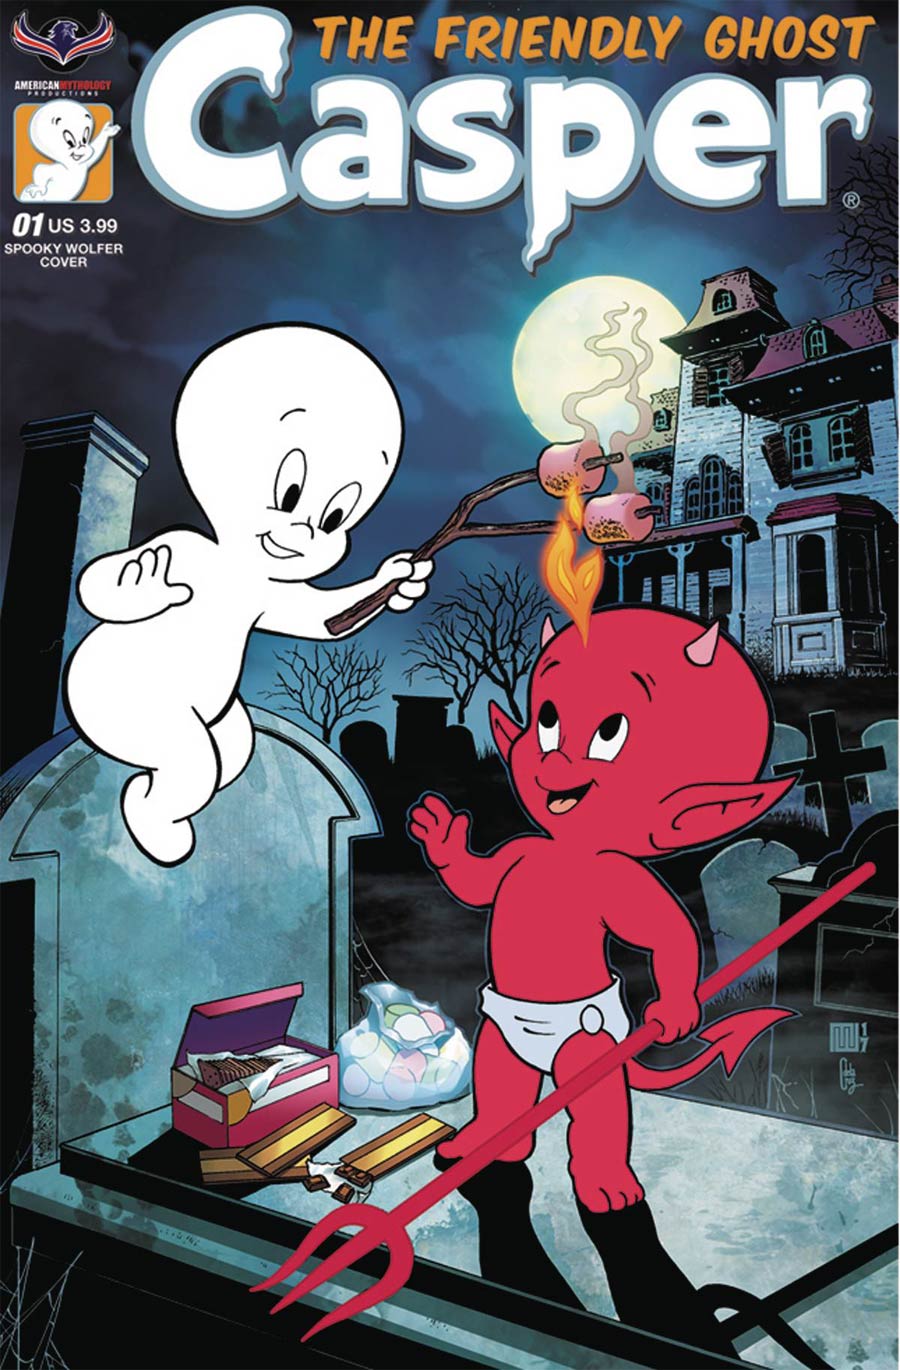 Casper The Friendly Ghost Vol 5 #1 Cover B Variant Mike Wolfer Spooky Cover